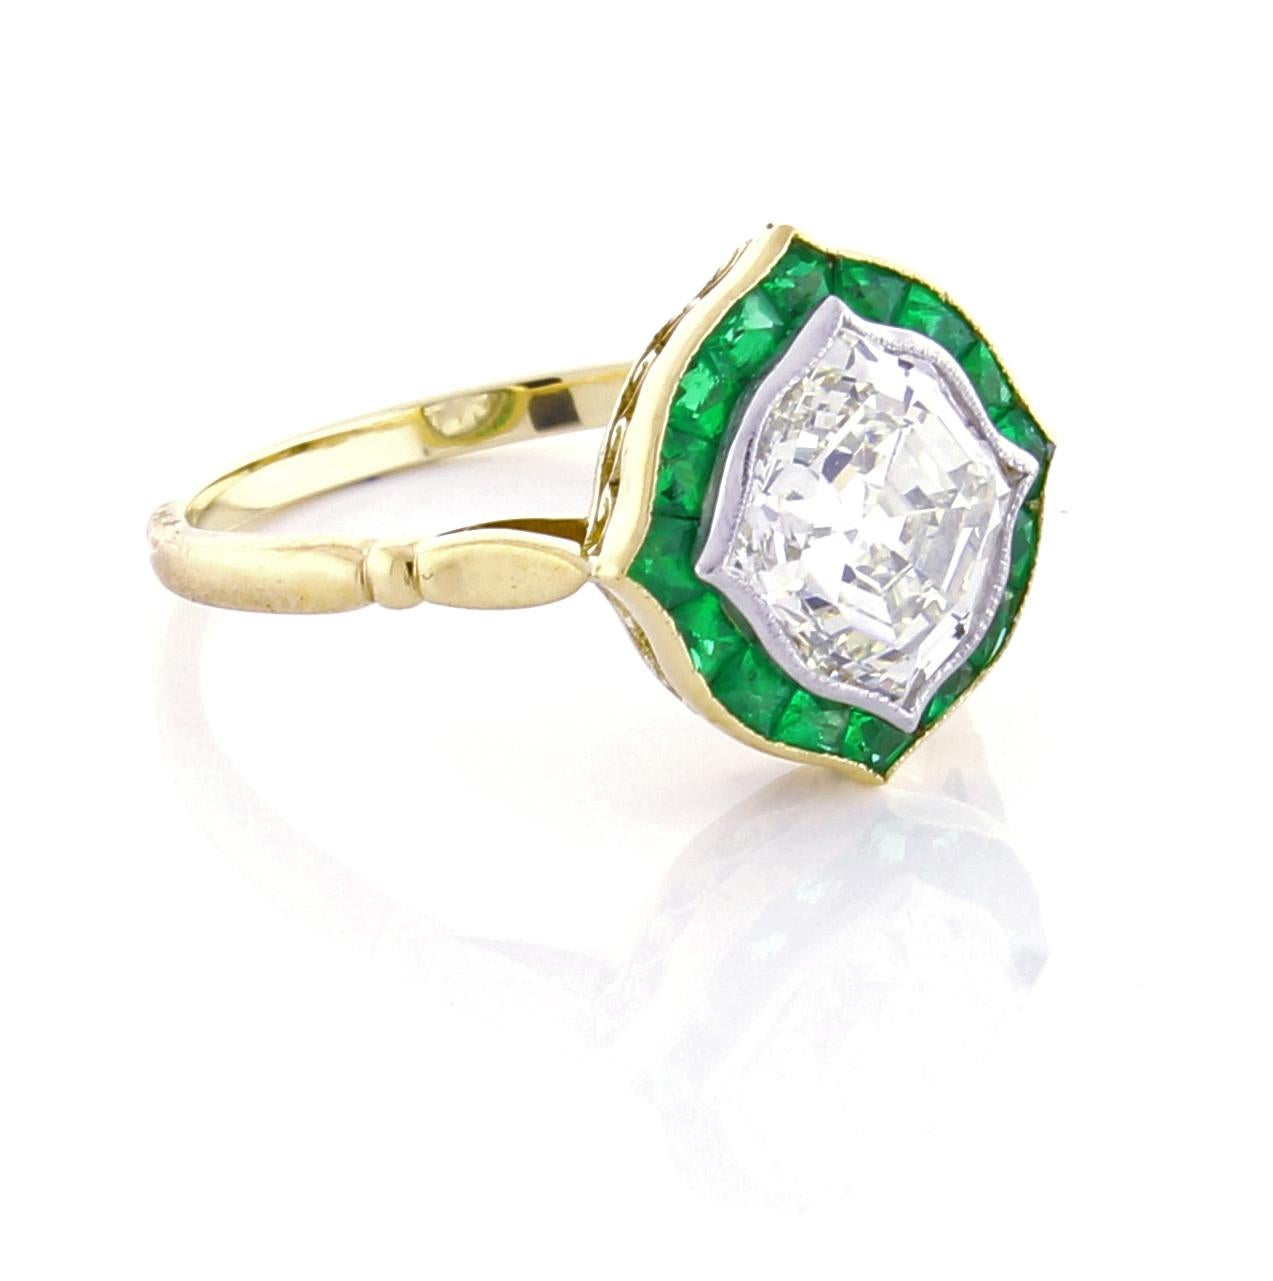 An unusual antique hexagonal shaped diamond is framed in six pointed bowed hexagonal platinum setting surrounded by meticulously calibrated fine emeralds. The ring is handmade in 18 karat gold. The diamond is approximately 1.80 carats, K color and